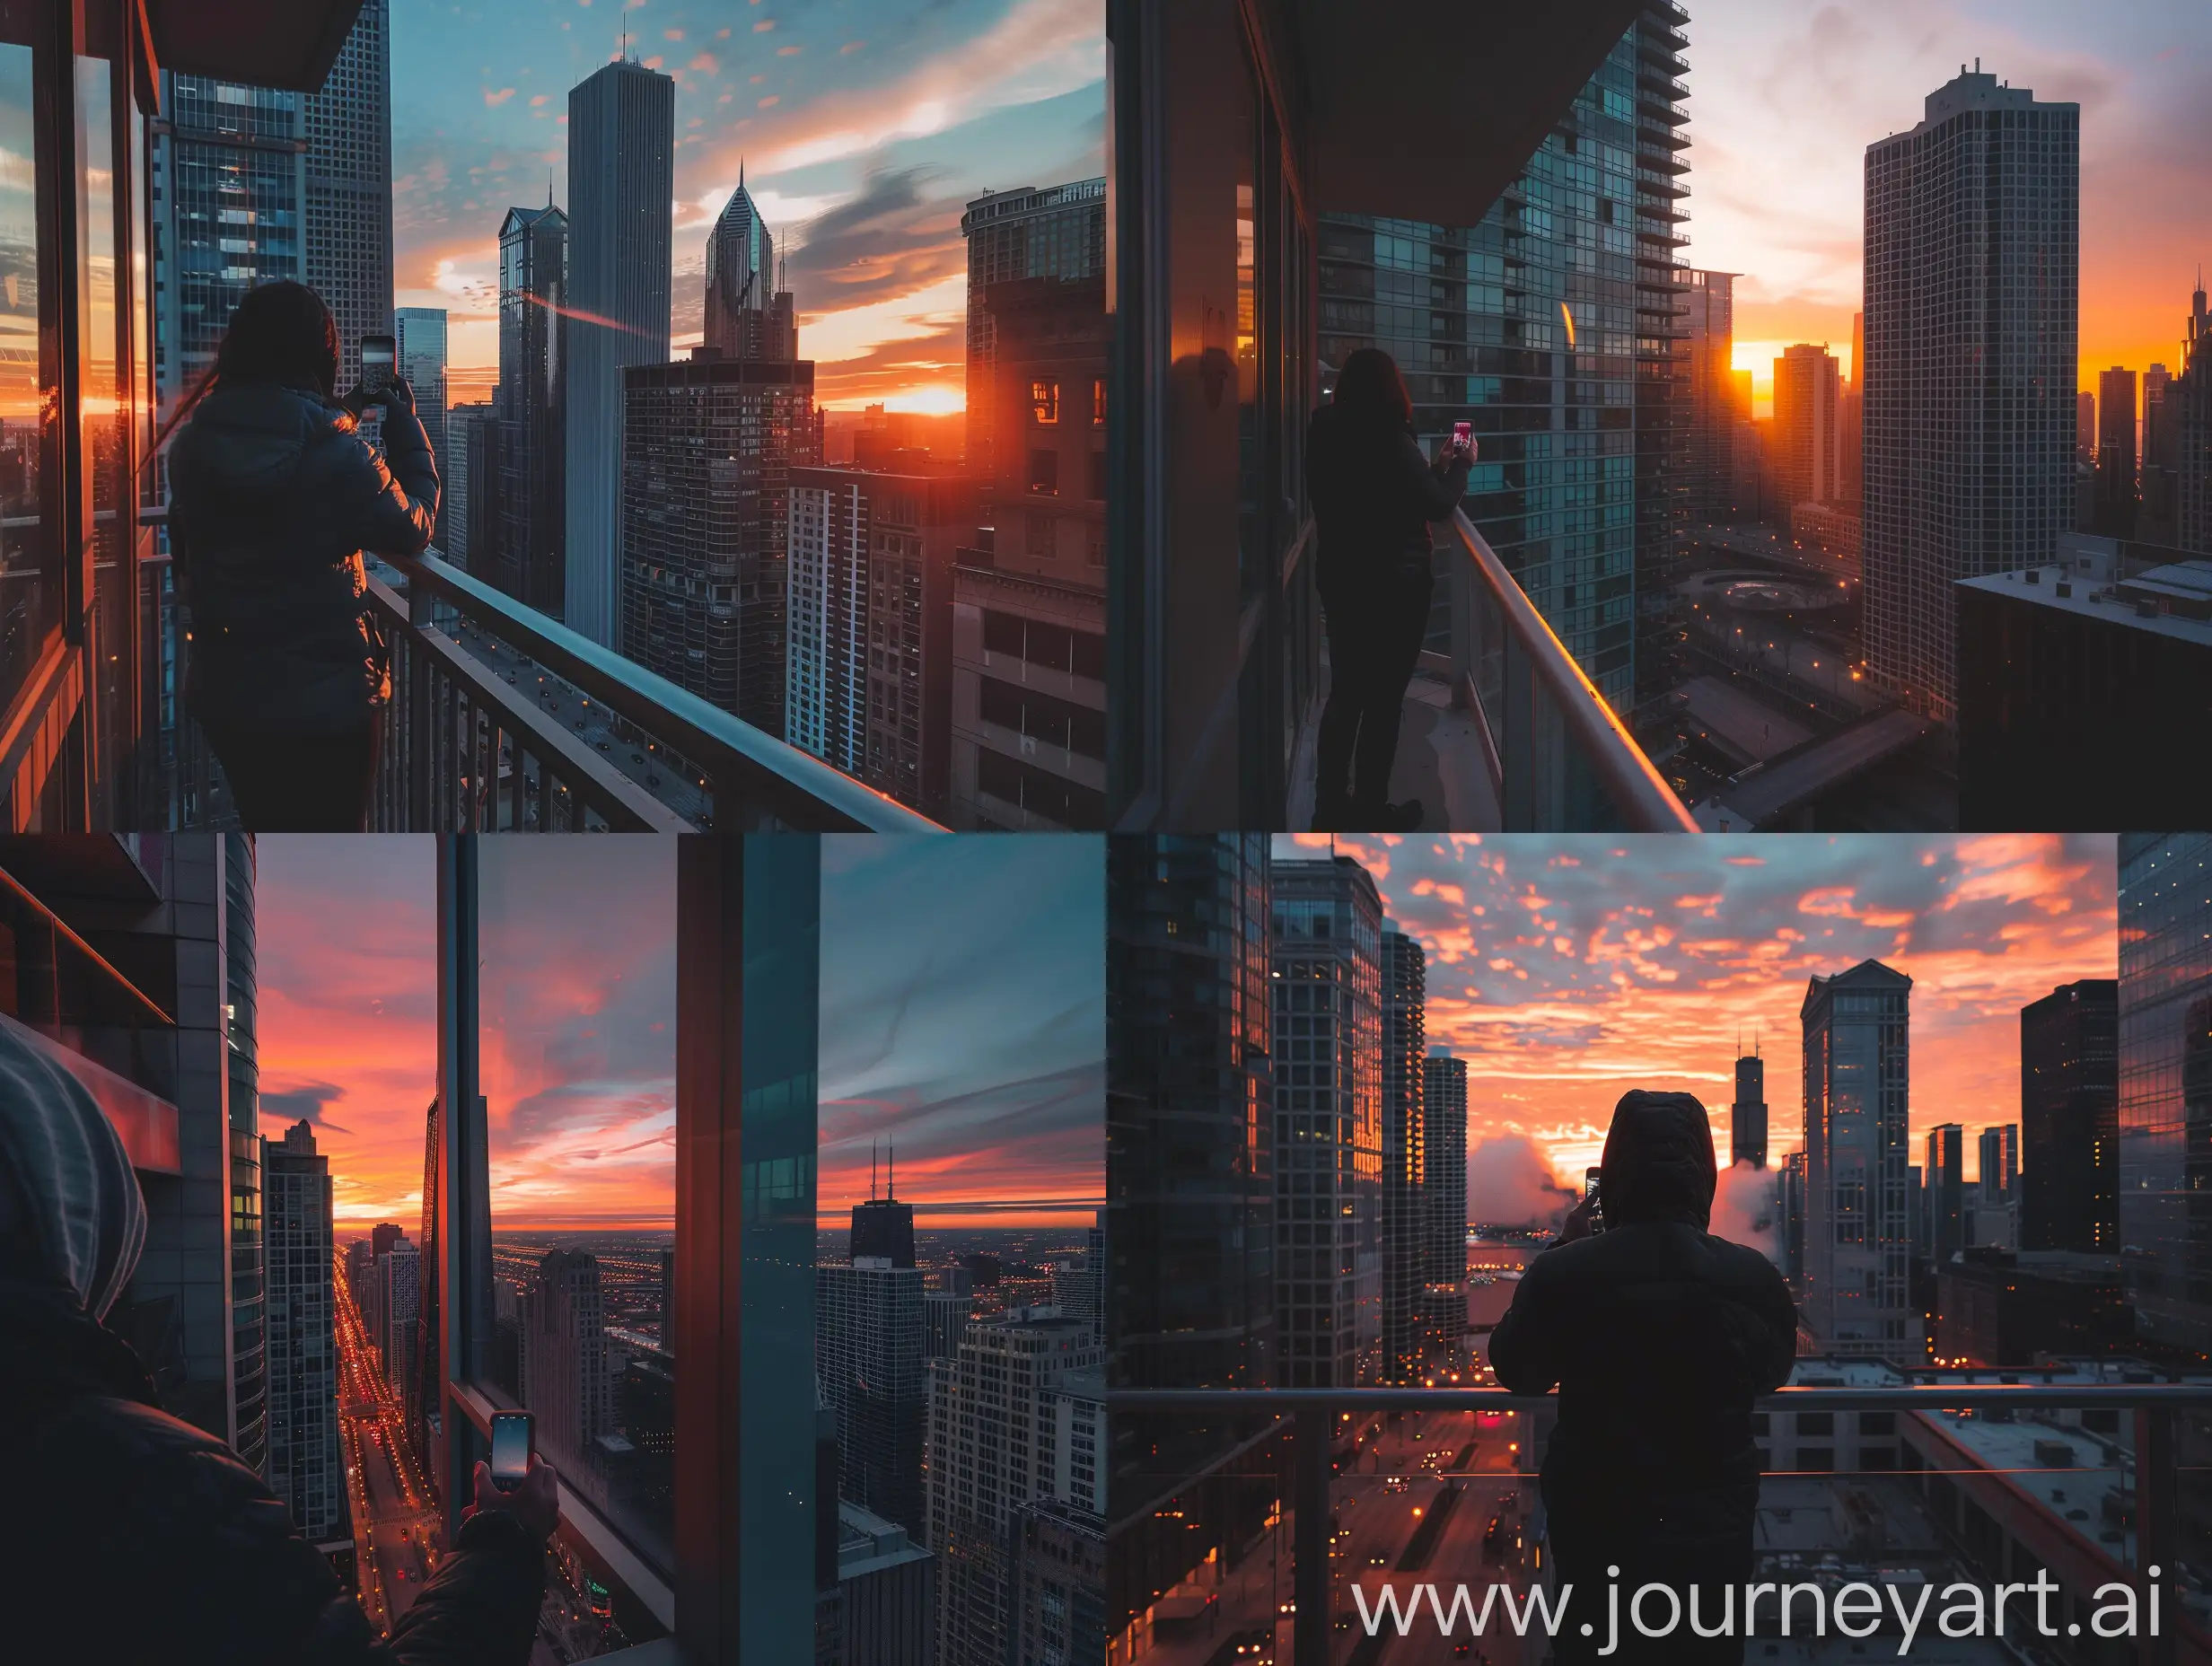 a phone photo of a person standing on the balcony, natural lighting, style raw posted on reddit in 2019, environment, looking at a city, Chicago, sunset time, busy smart city,

